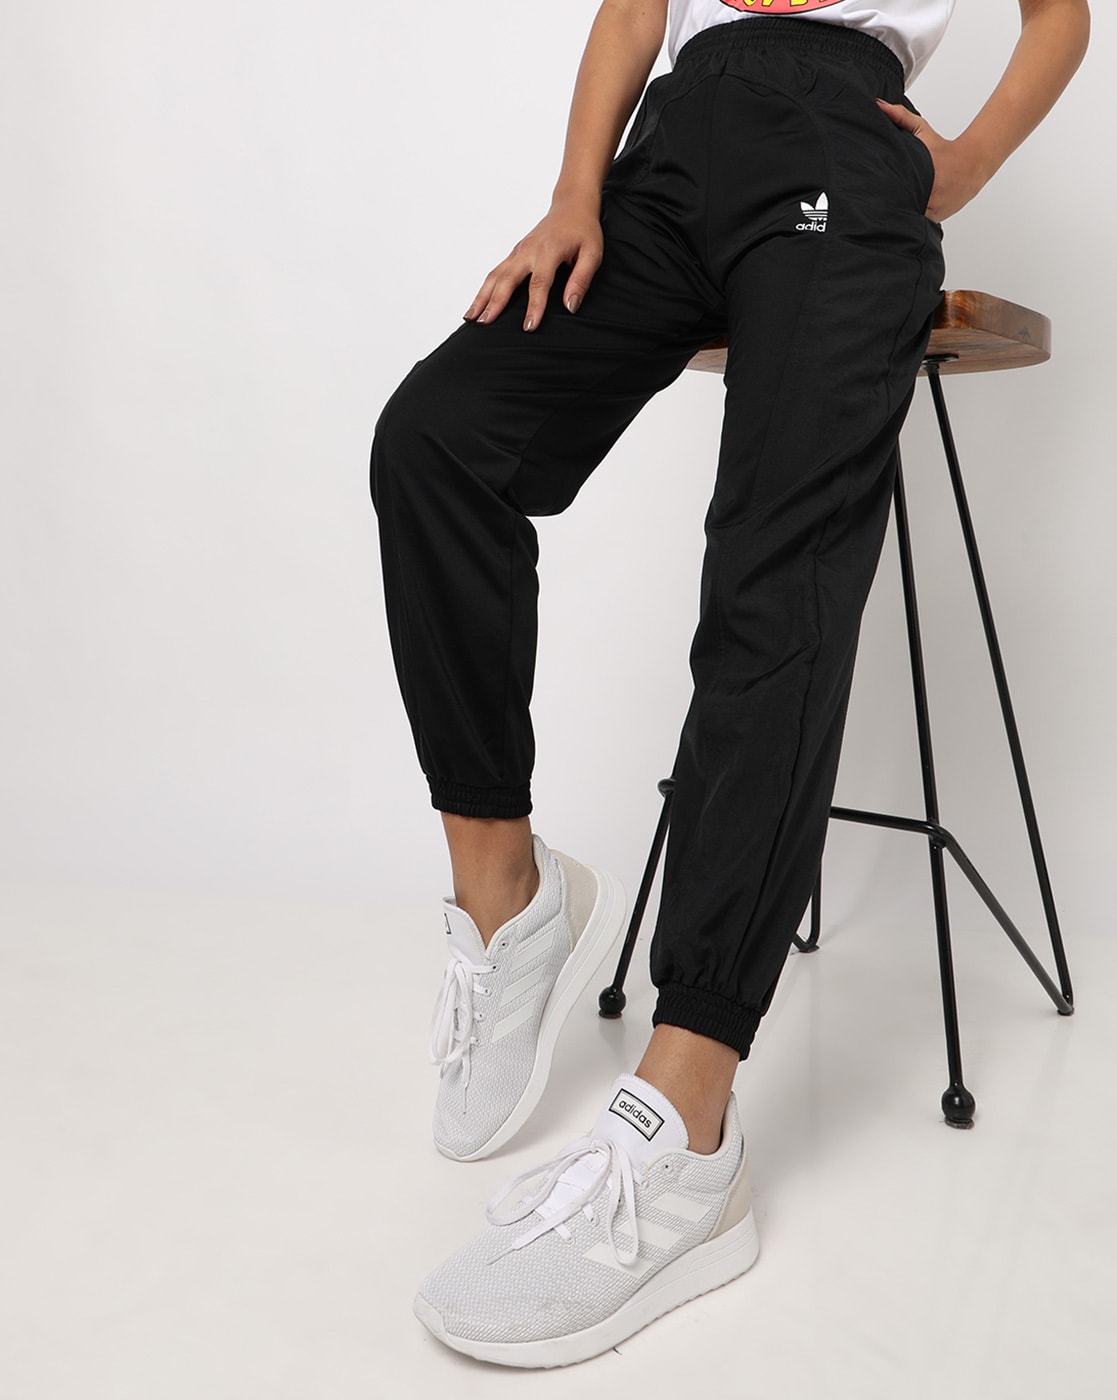 Loose fit Black Track Pant With Printed Pattern